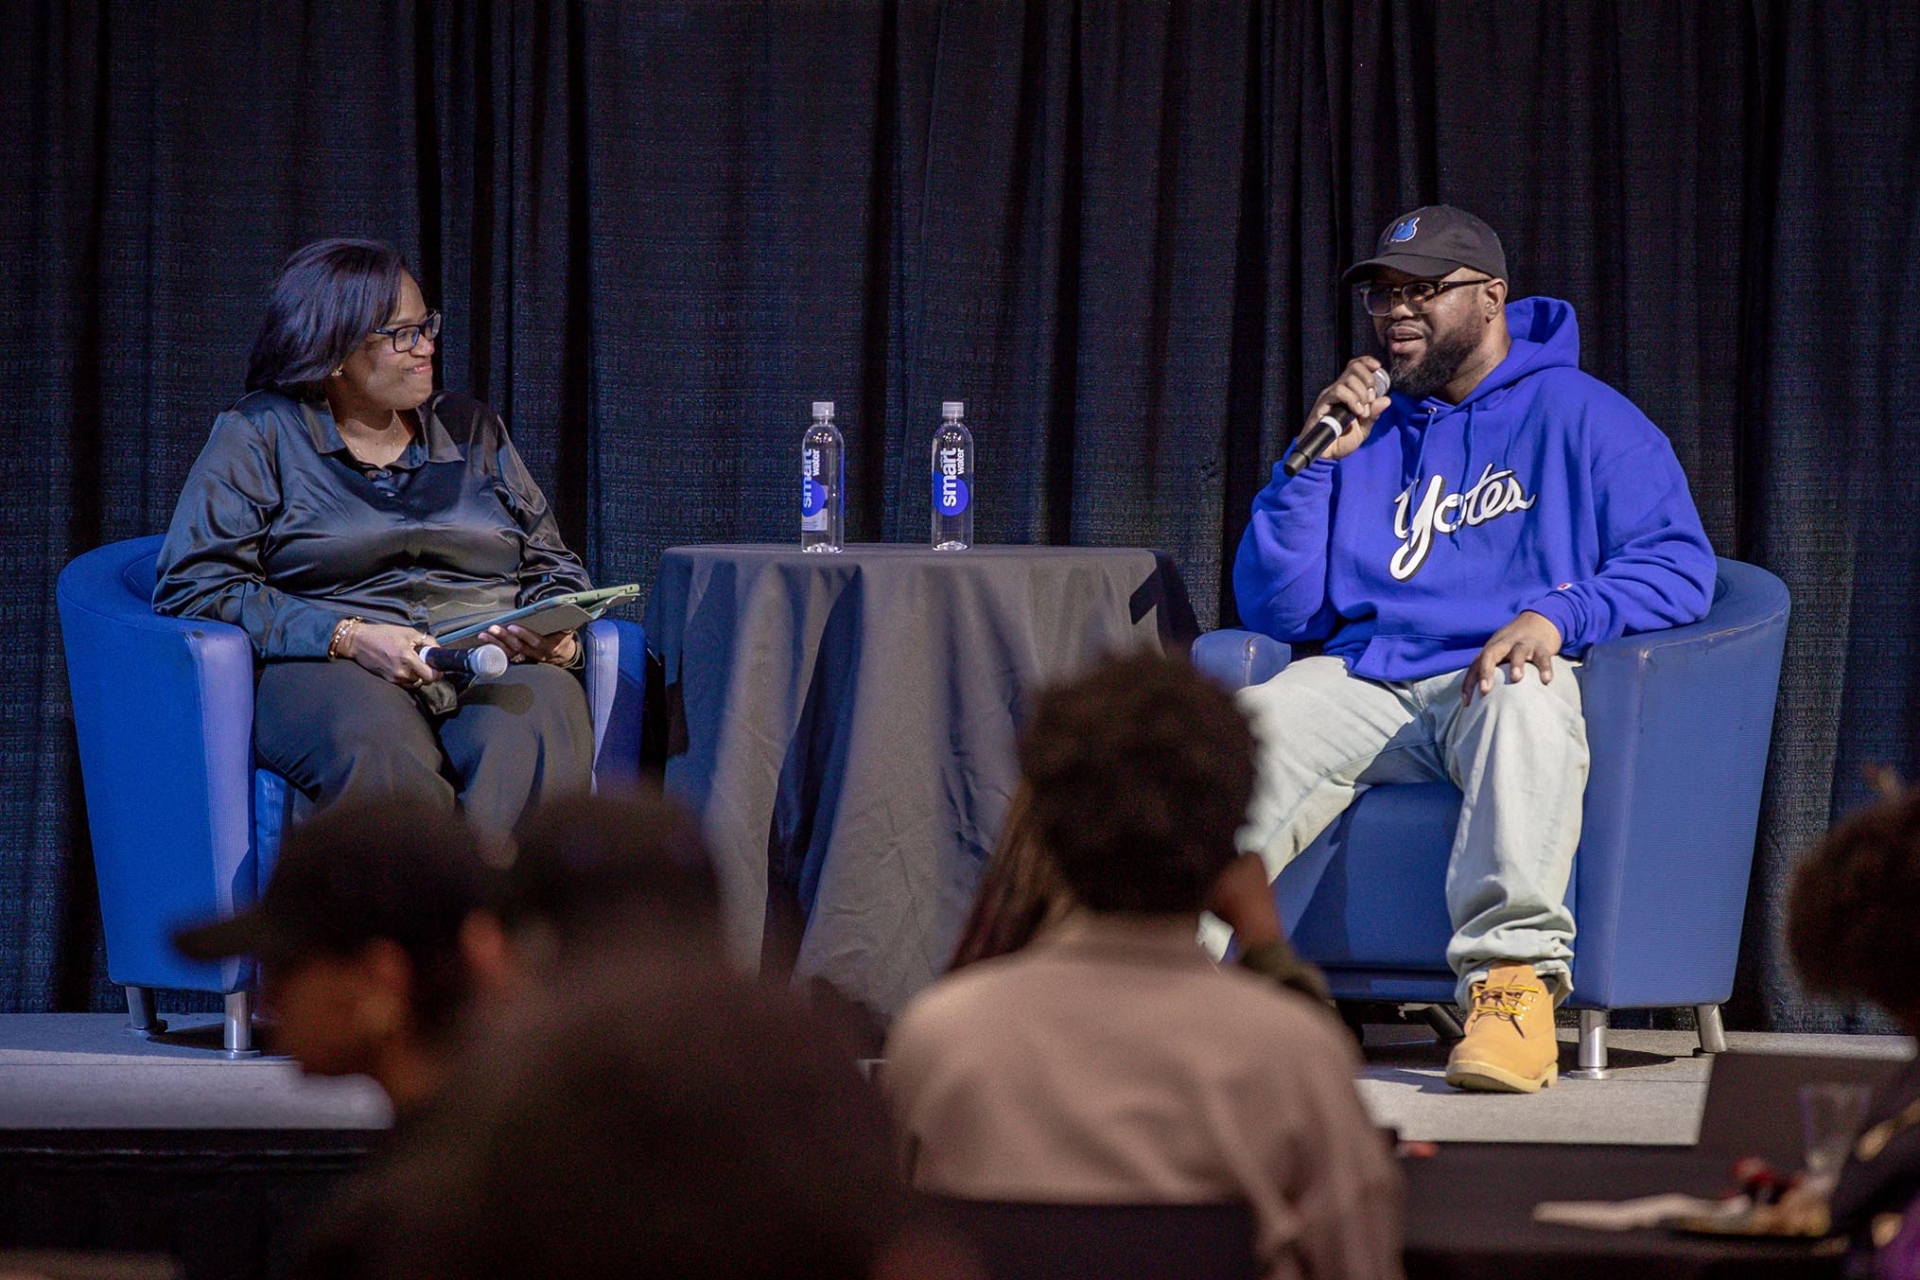  Daria Graham (left), associate vice president for Student Affairs and dean of students, moderated the program that featured Terrence Floyd at CSUSB's Social Justice Summit.>>